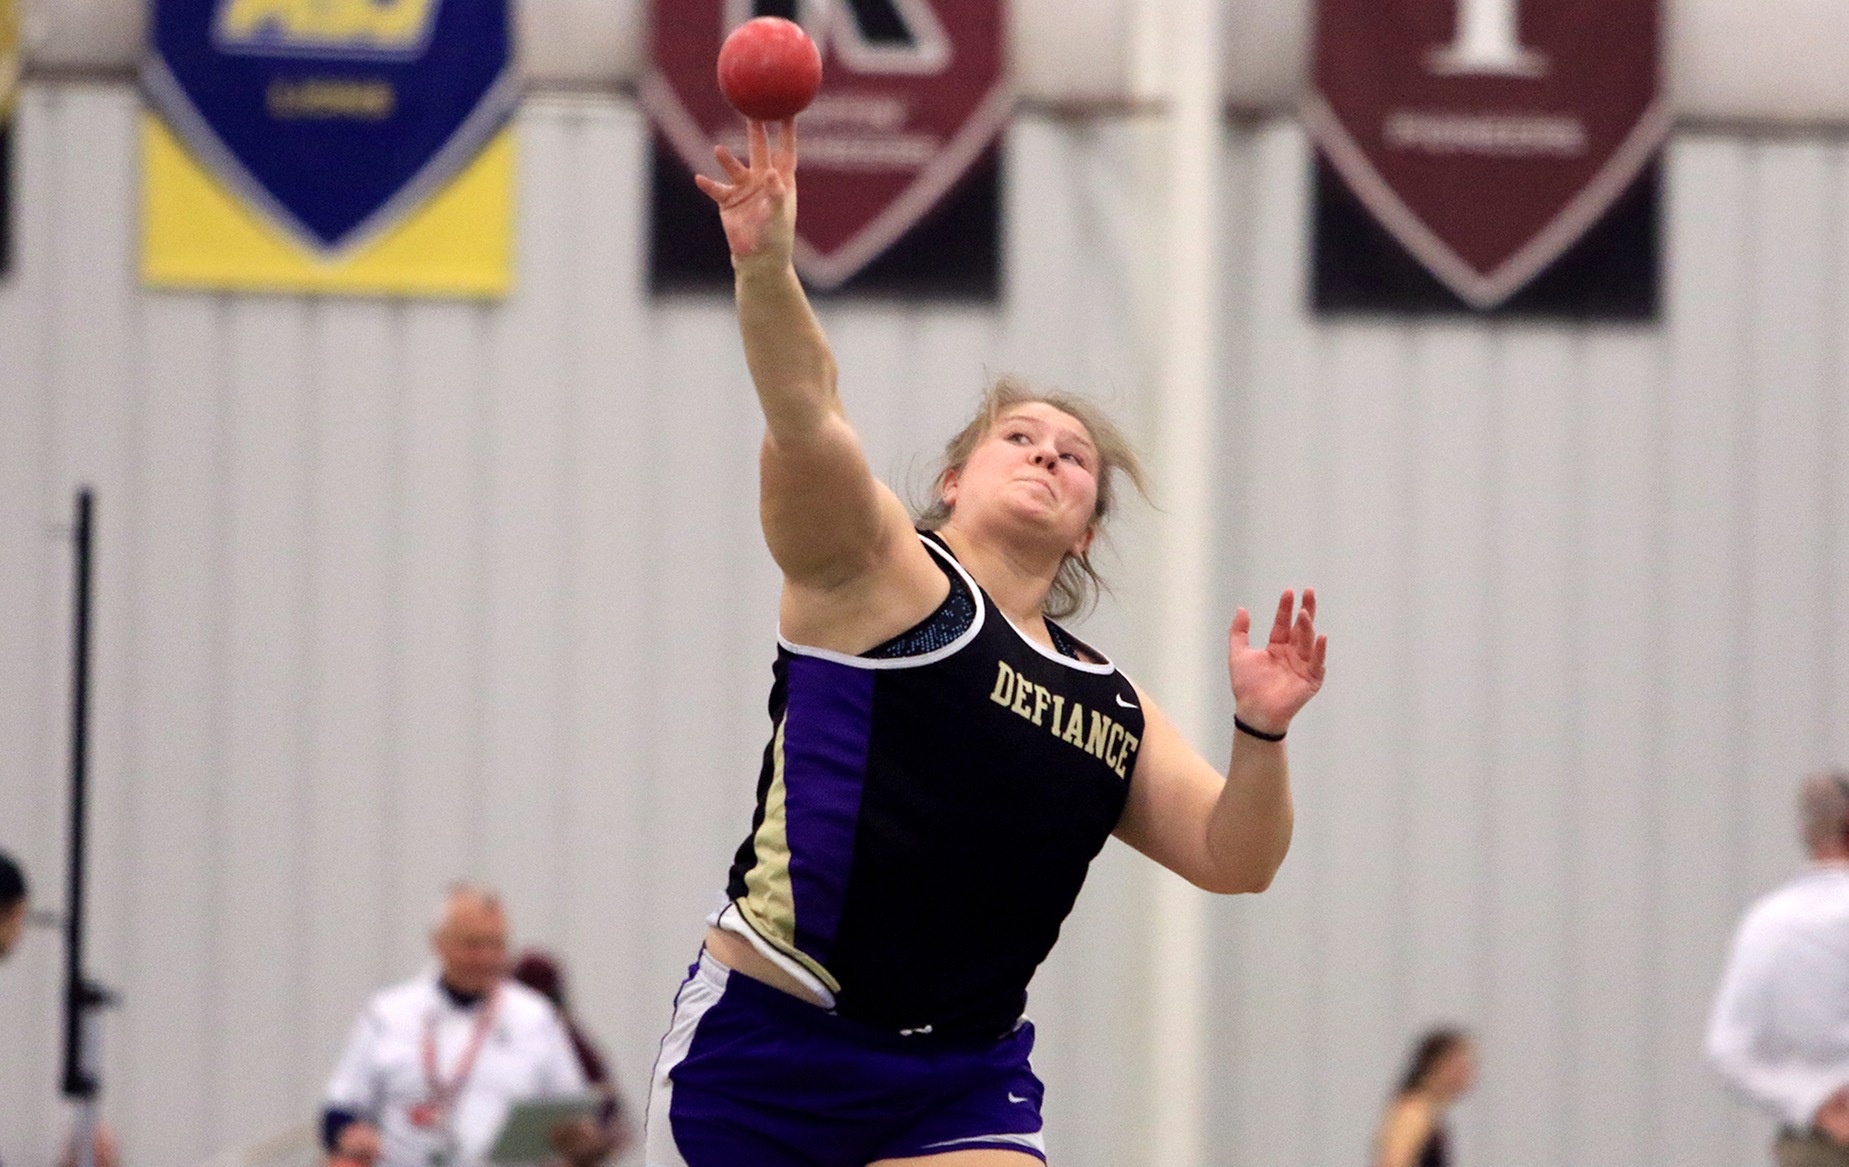 Women Throwers Finish Strong at Defiance Invitational